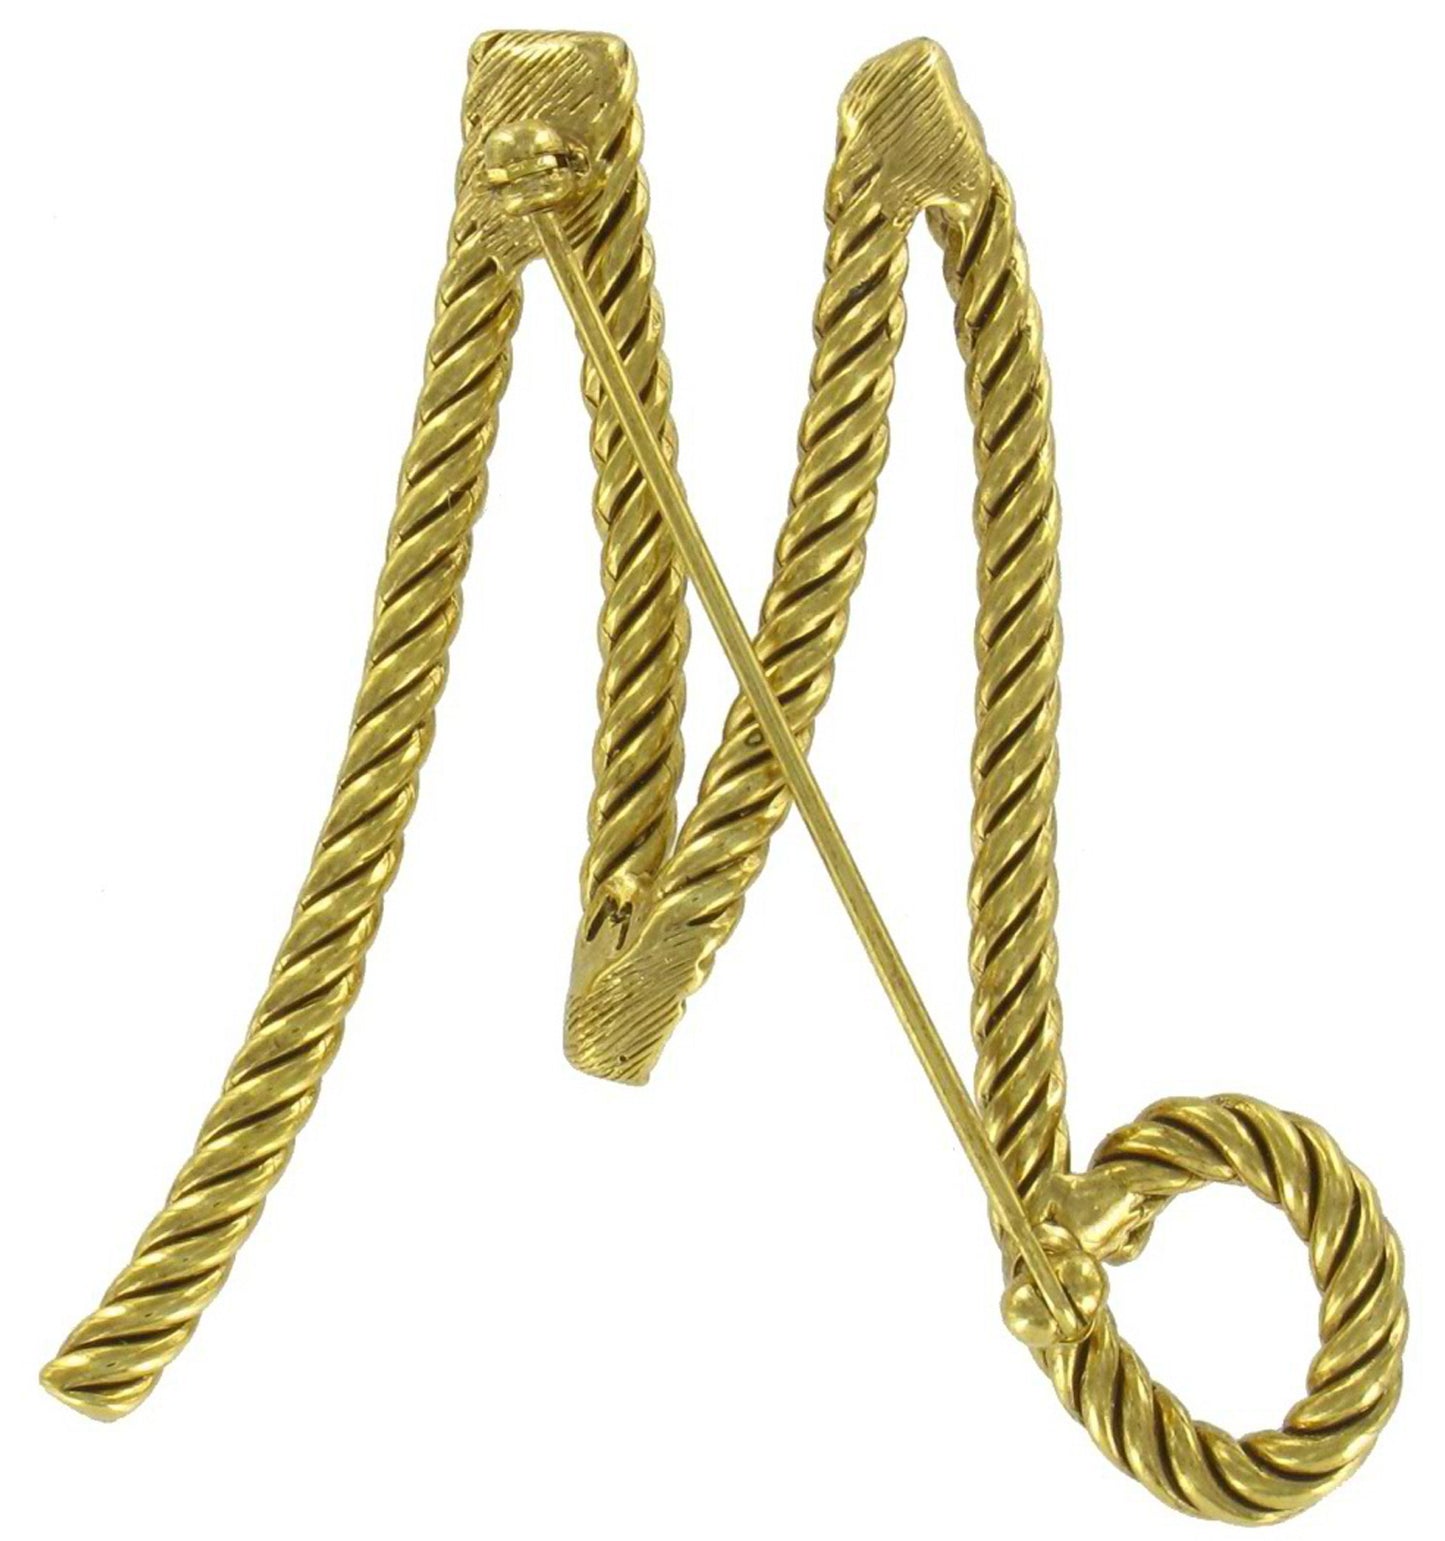 Large Big Script Gold Tone Rope Textured Initial Letter "M" Brooch Pin 2 1/2"